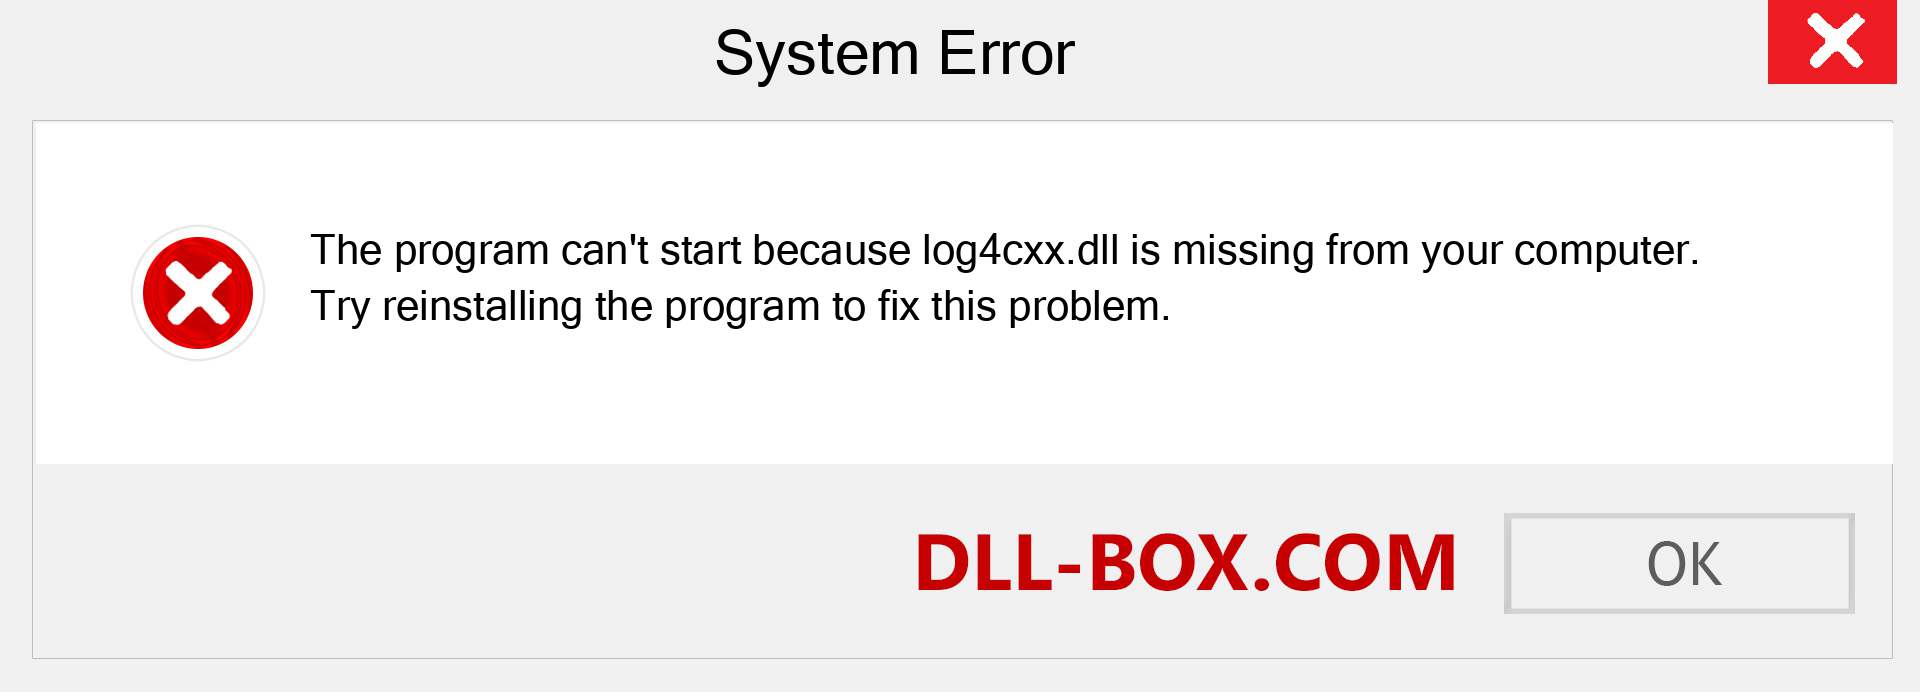  log4cxx.dll file is missing?. Download for Windows 7, 8, 10 - Fix  log4cxx dll Missing Error on Windows, photos, images